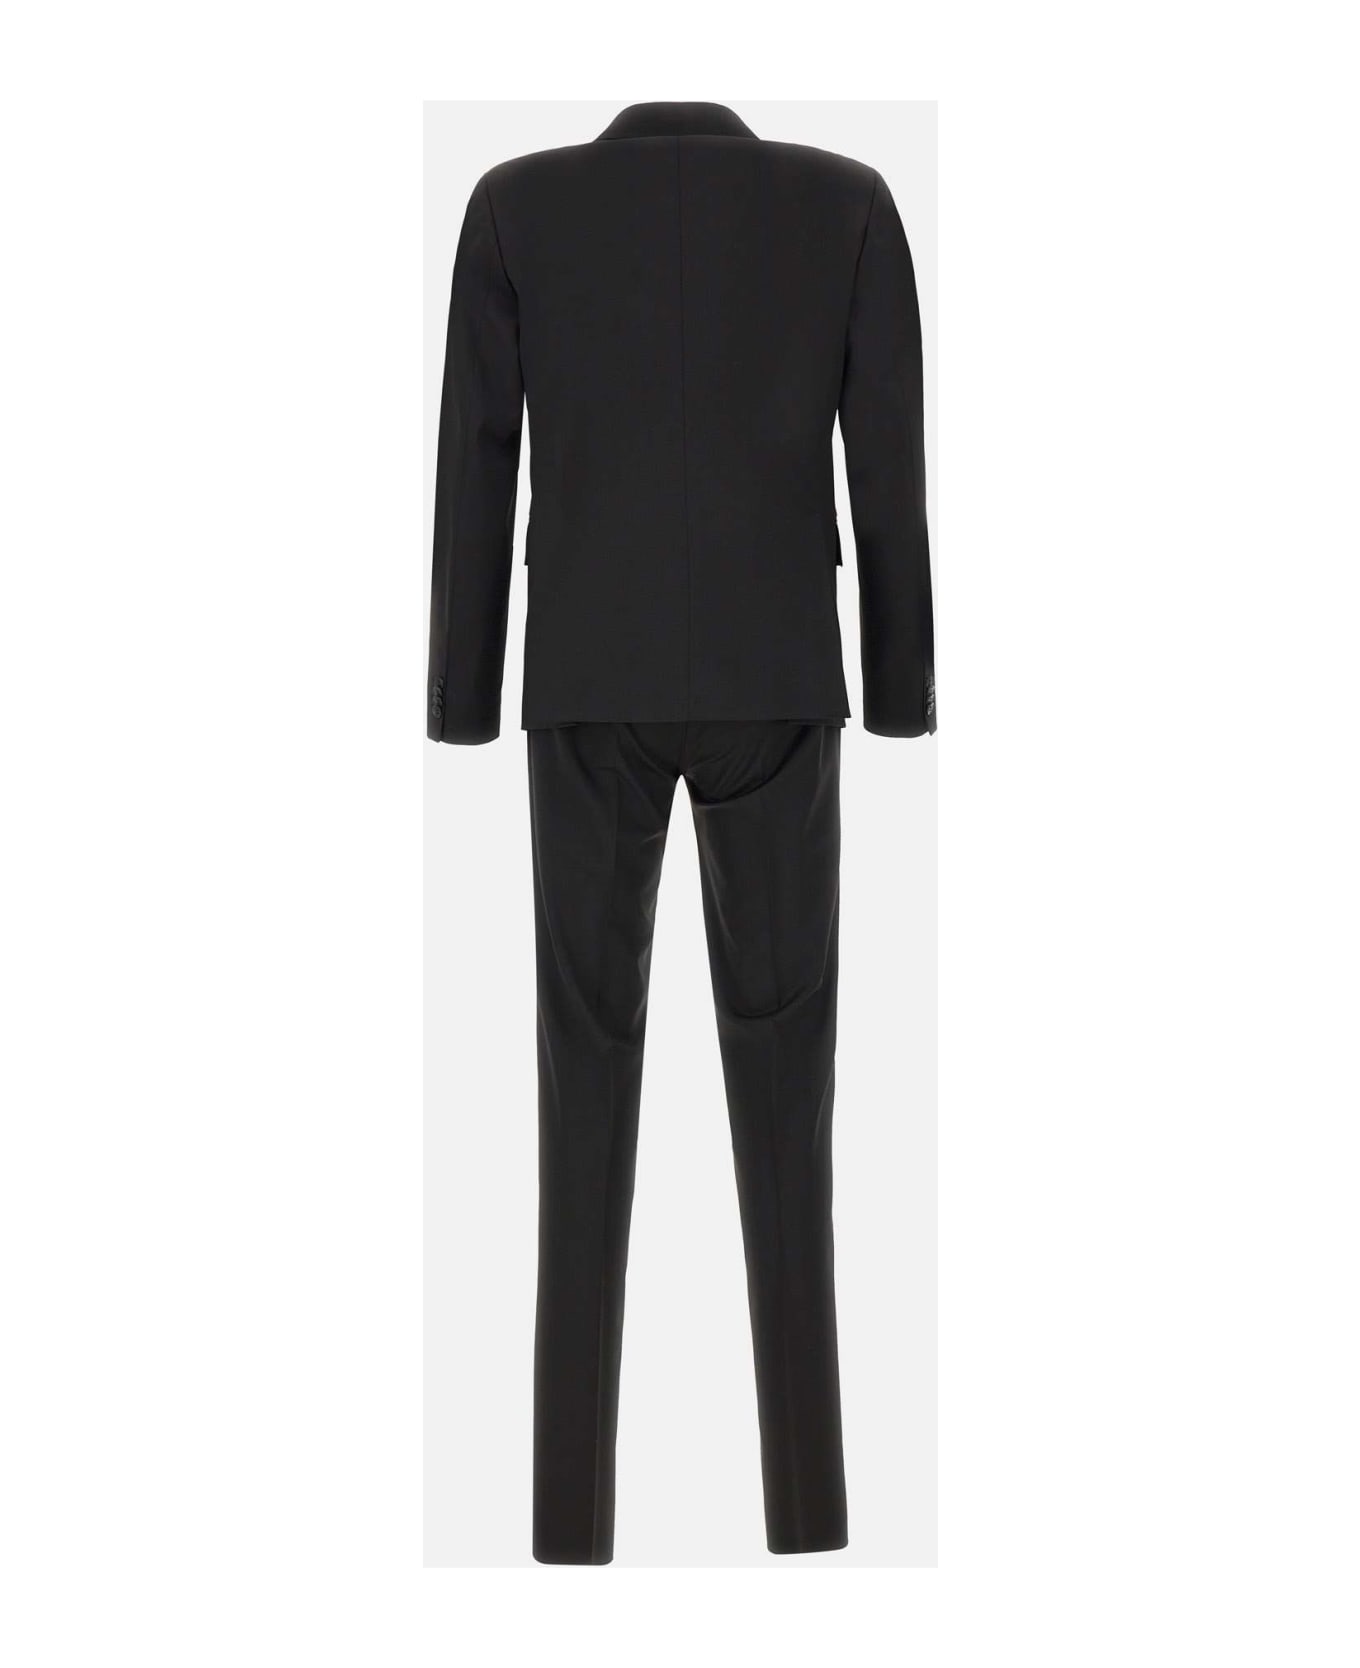 Brian Dales "ga87" Suit Two-piece Cool Wool - BLACK